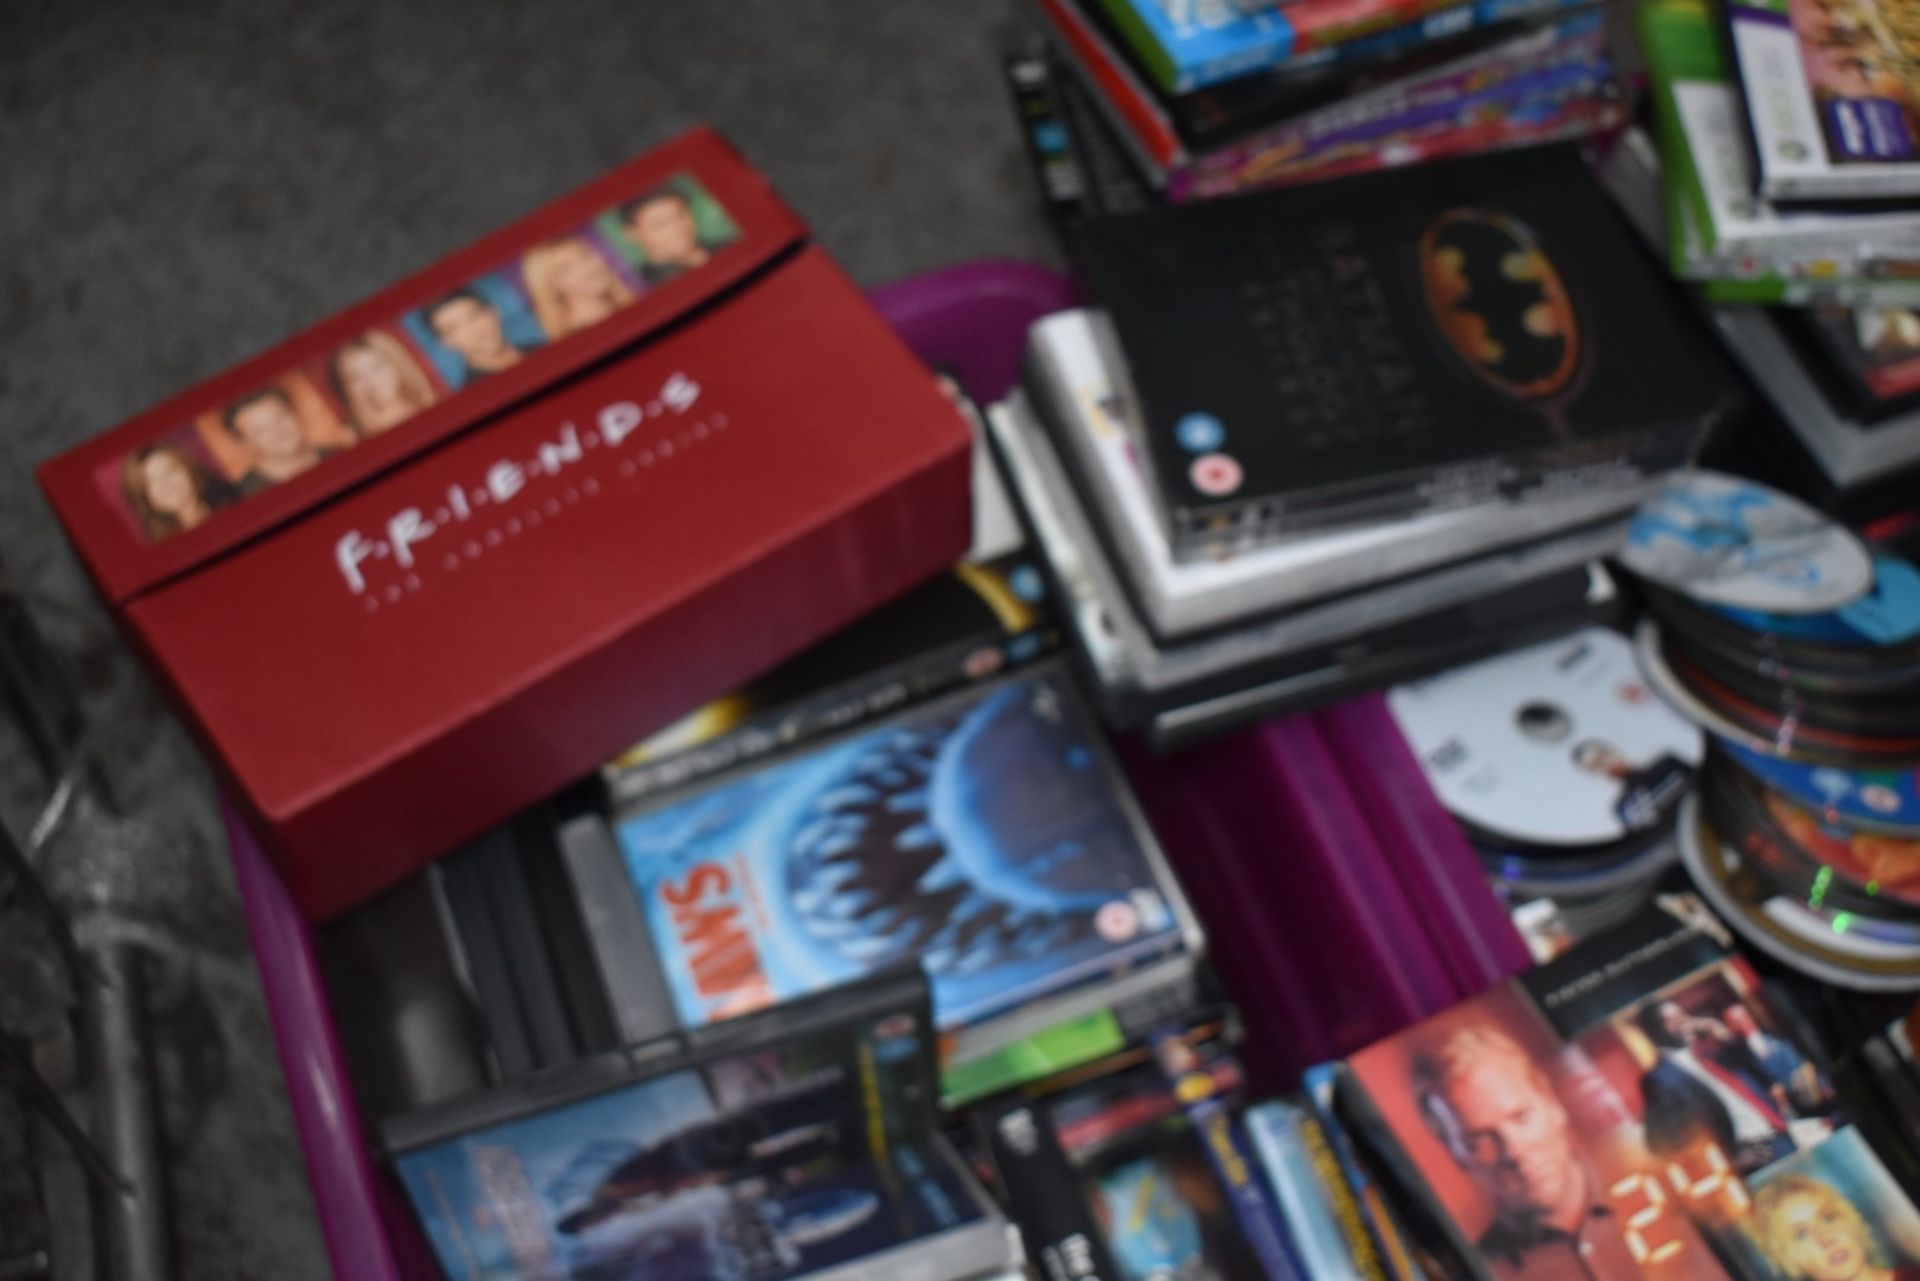 1 x Large Collection of DVD Films and Games - Plus Box Sets and Portable DVD Player - Ref: In2108 - Image 2 of 10